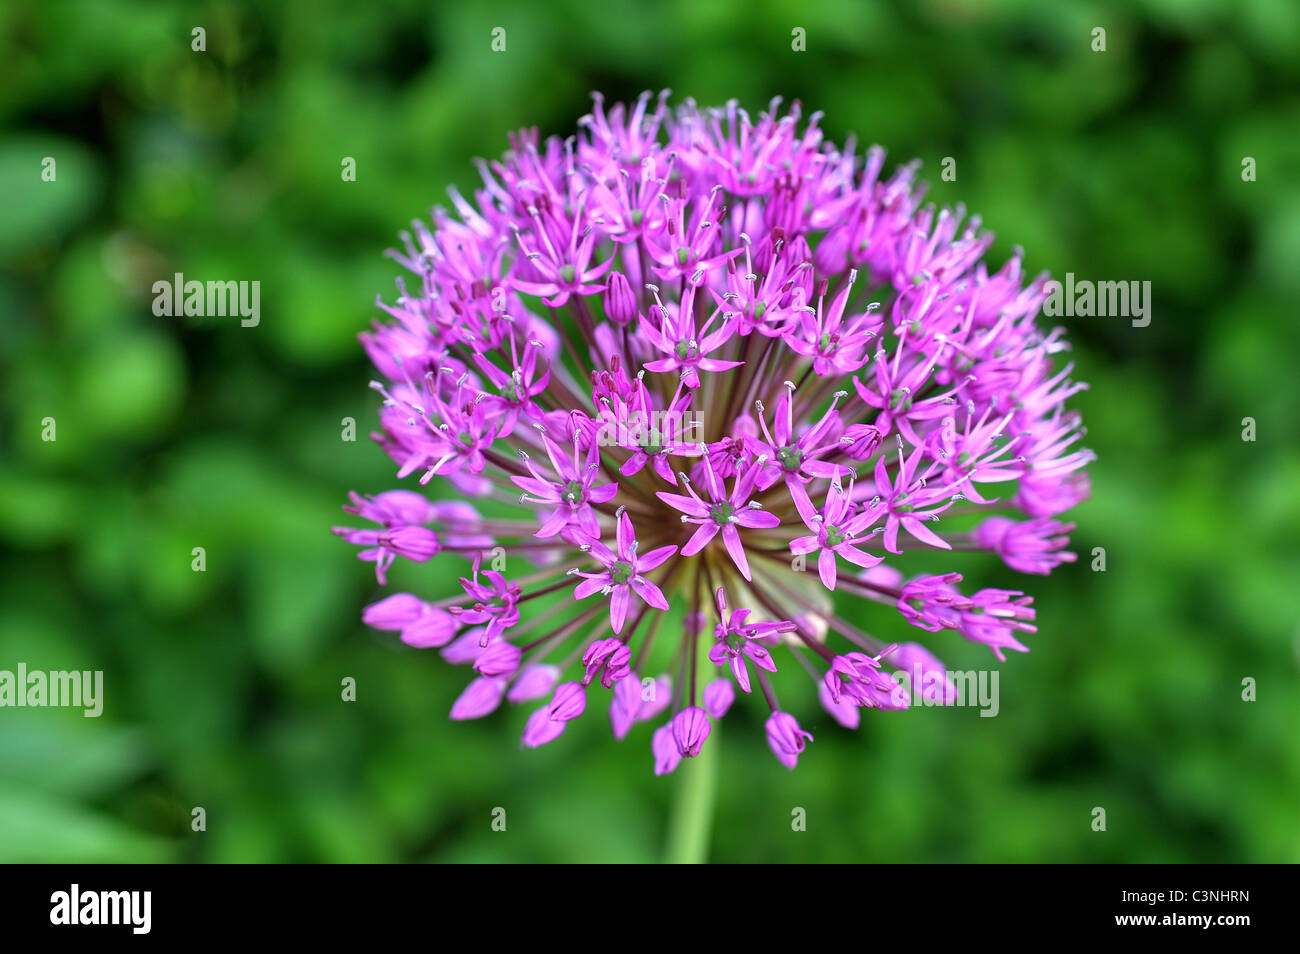 Purple Alium single flower shot with green background in full bloom Stock Photo